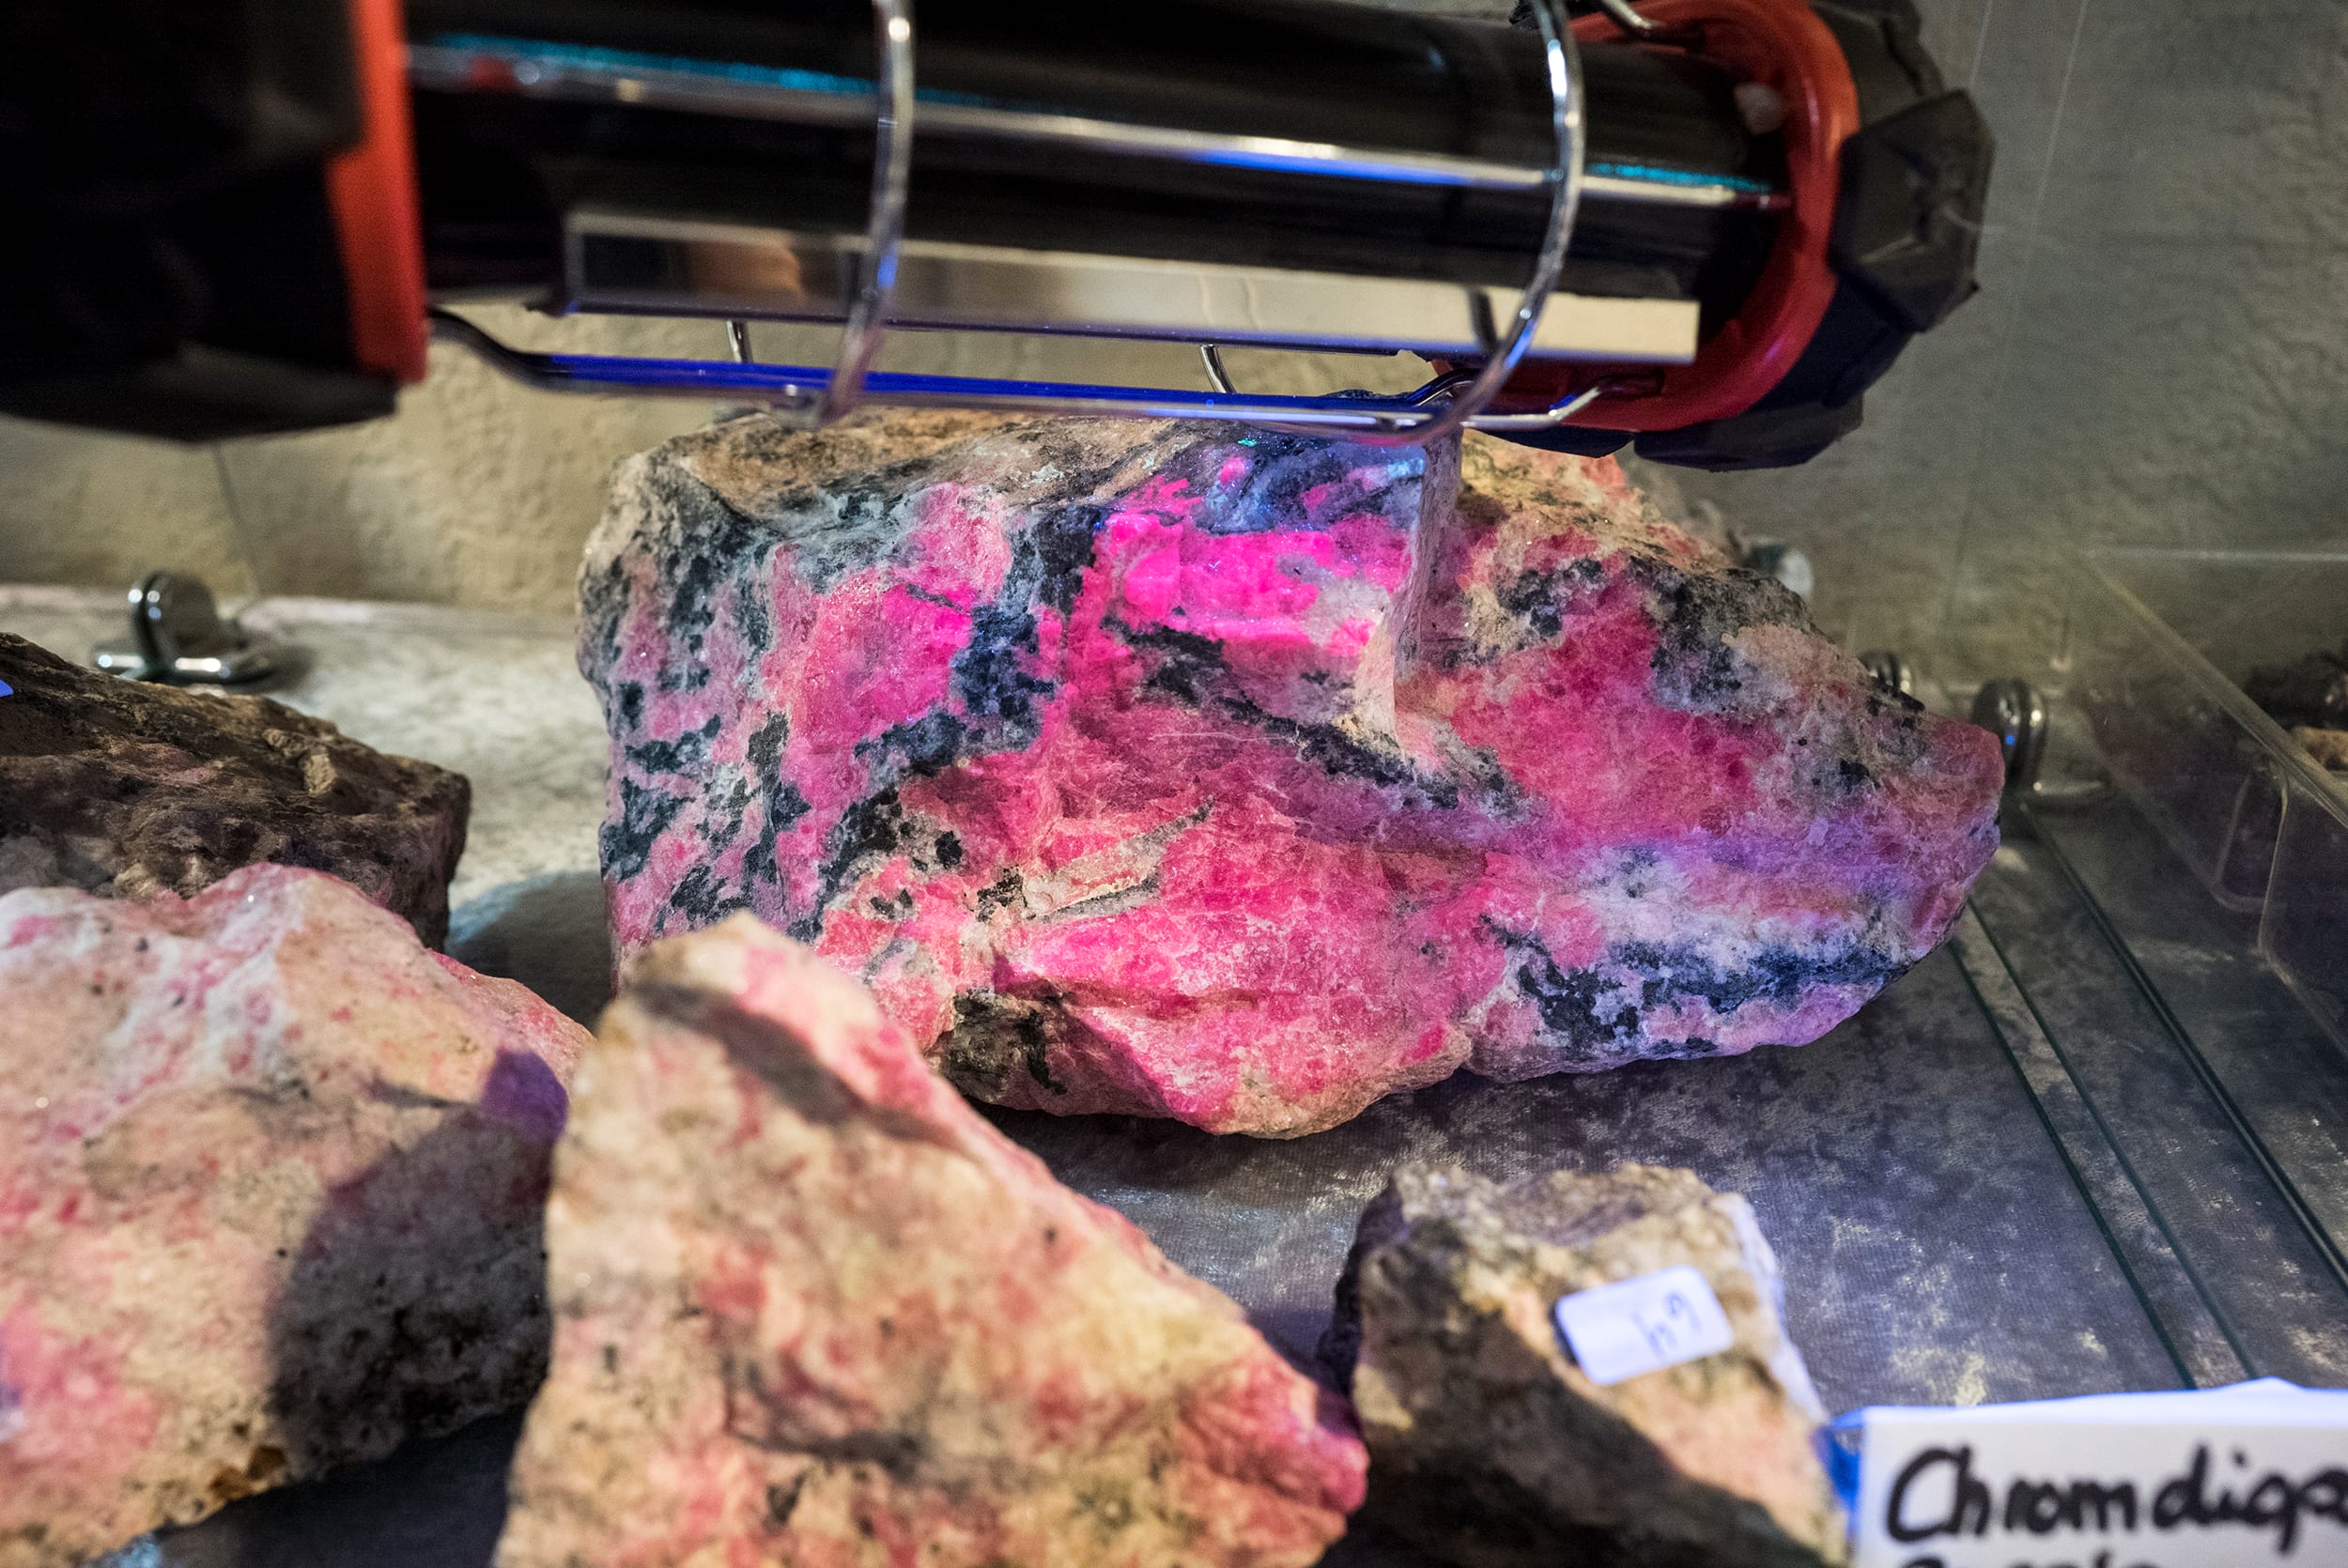  The seller wanted $40,000 for this wonderful piece of tugtupite 